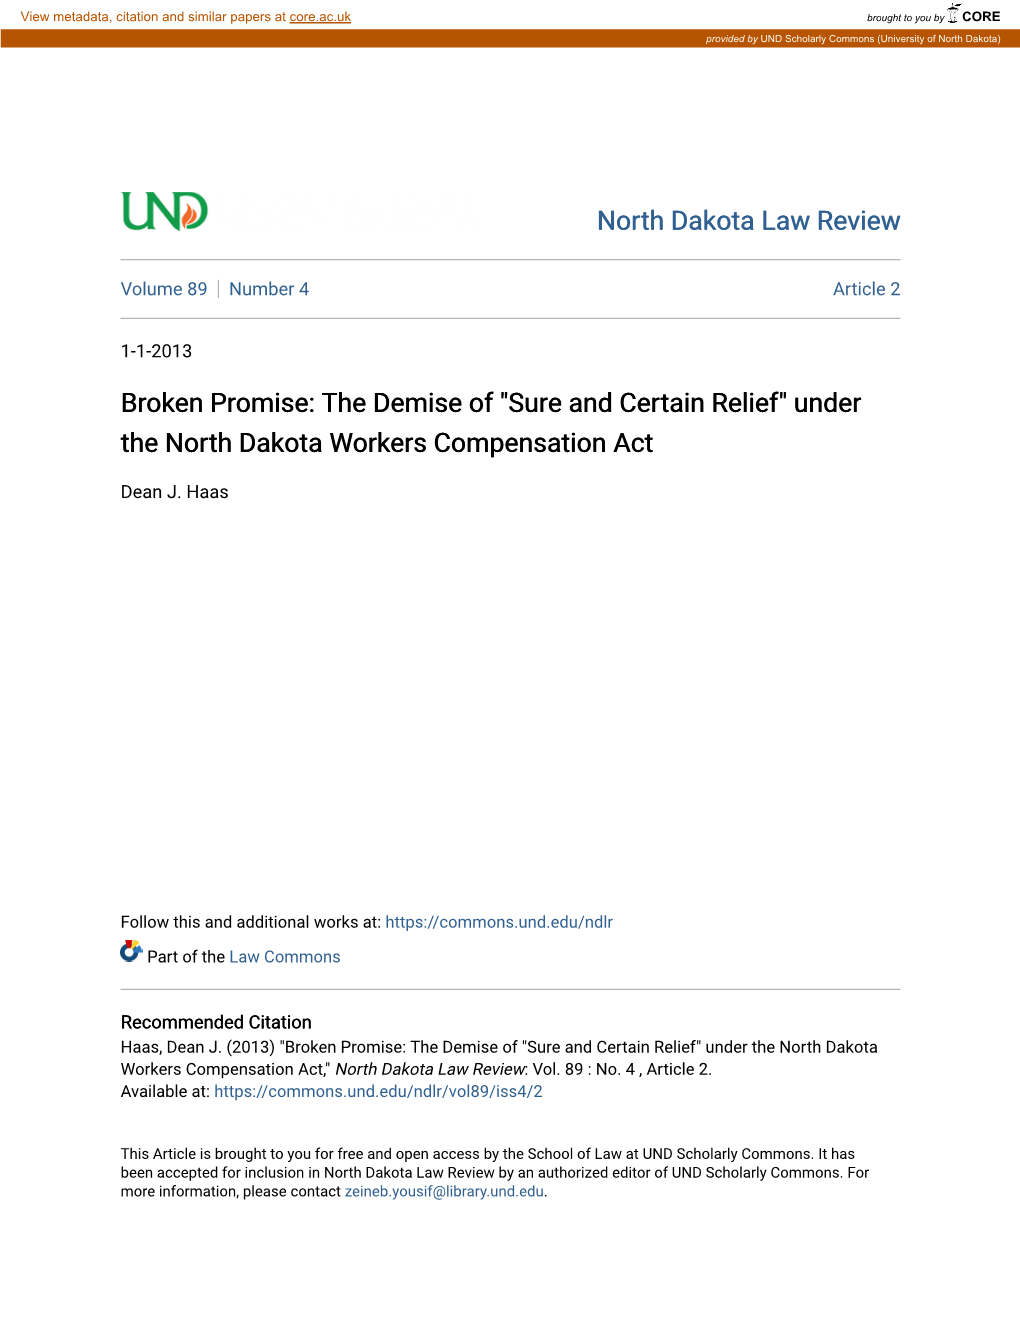 Under the North Dakota Workers Compensation Act